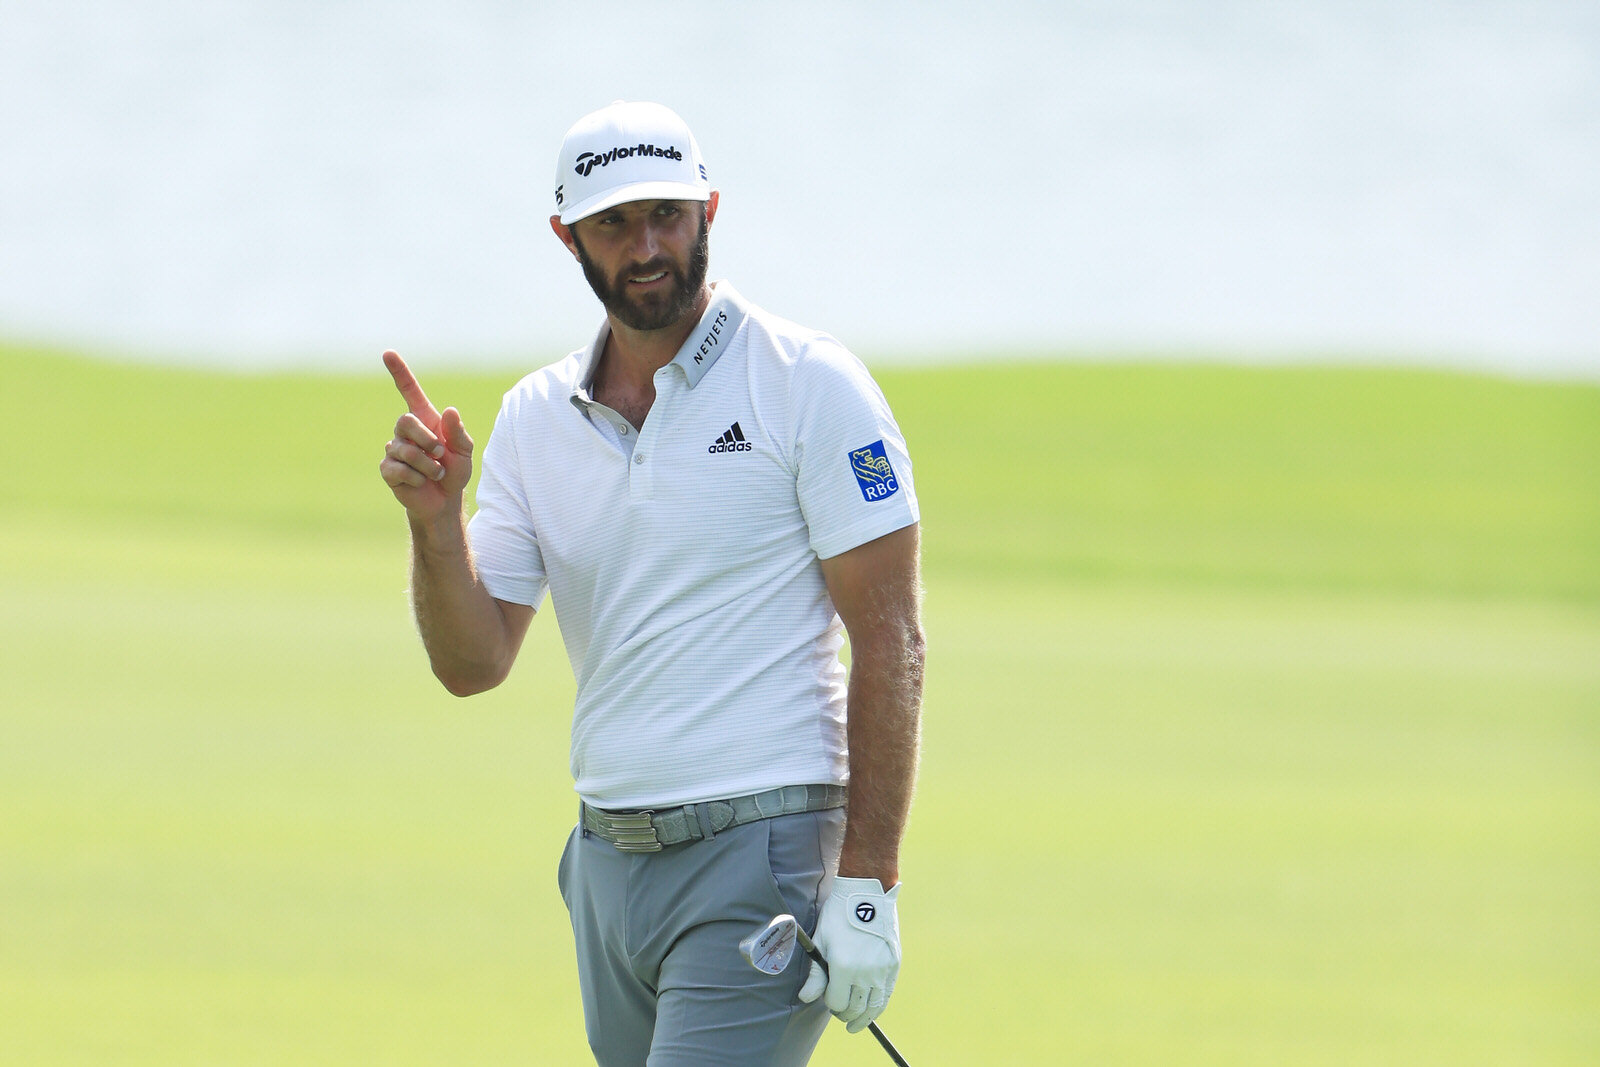  ATLANTA, GEORGIA - SEPTEMBER 05:  Dustin Johnson of the United States reacts after chipping in on the eighth hole during the second round of the TOUR Championship at East Lake Golf Club on September 05, 2020 in Atlanta, Georgia. (Photo by Sam Greenw